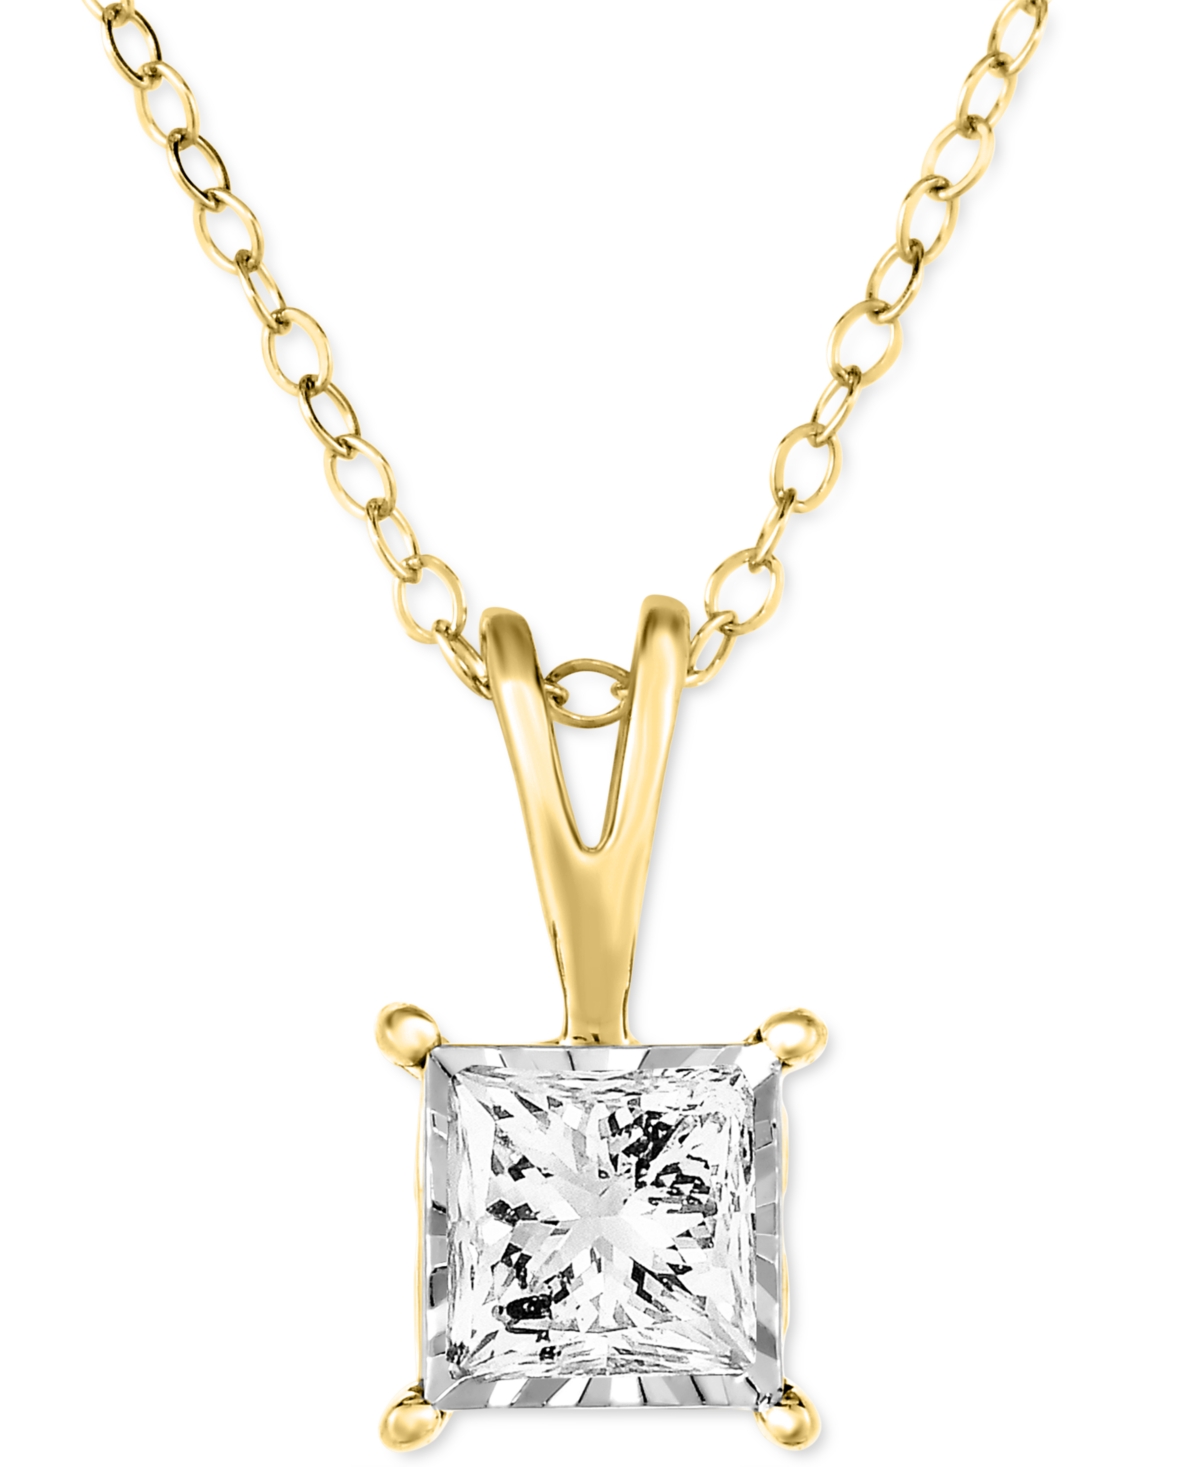 Diamond Princess 18" Pendant Necklace (1/2 ct. t.w.) in 14k White, Yellow, or Rose Gold - Rose Gold